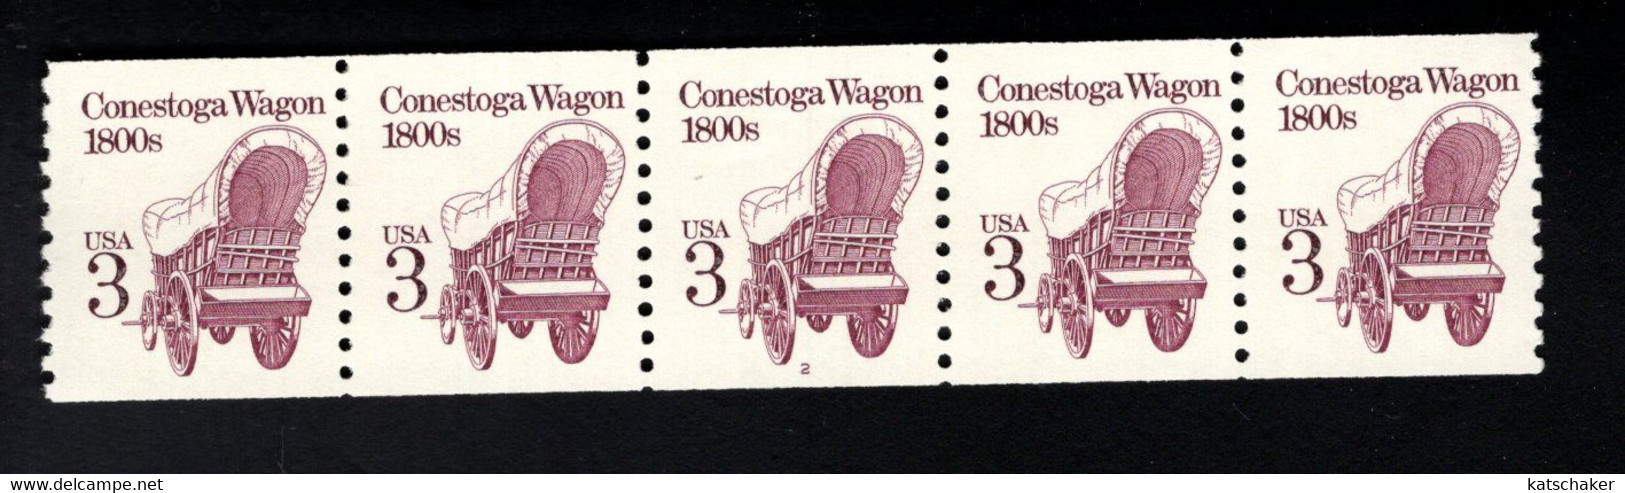 450351712 1987 (XX) SCOTT 2252A DULL GUM POSTFRIS MINTNEVER HINGED TRANSTORTATION CONESTOGA WAGON PLATE 2 - Coils (Plate Numbers)